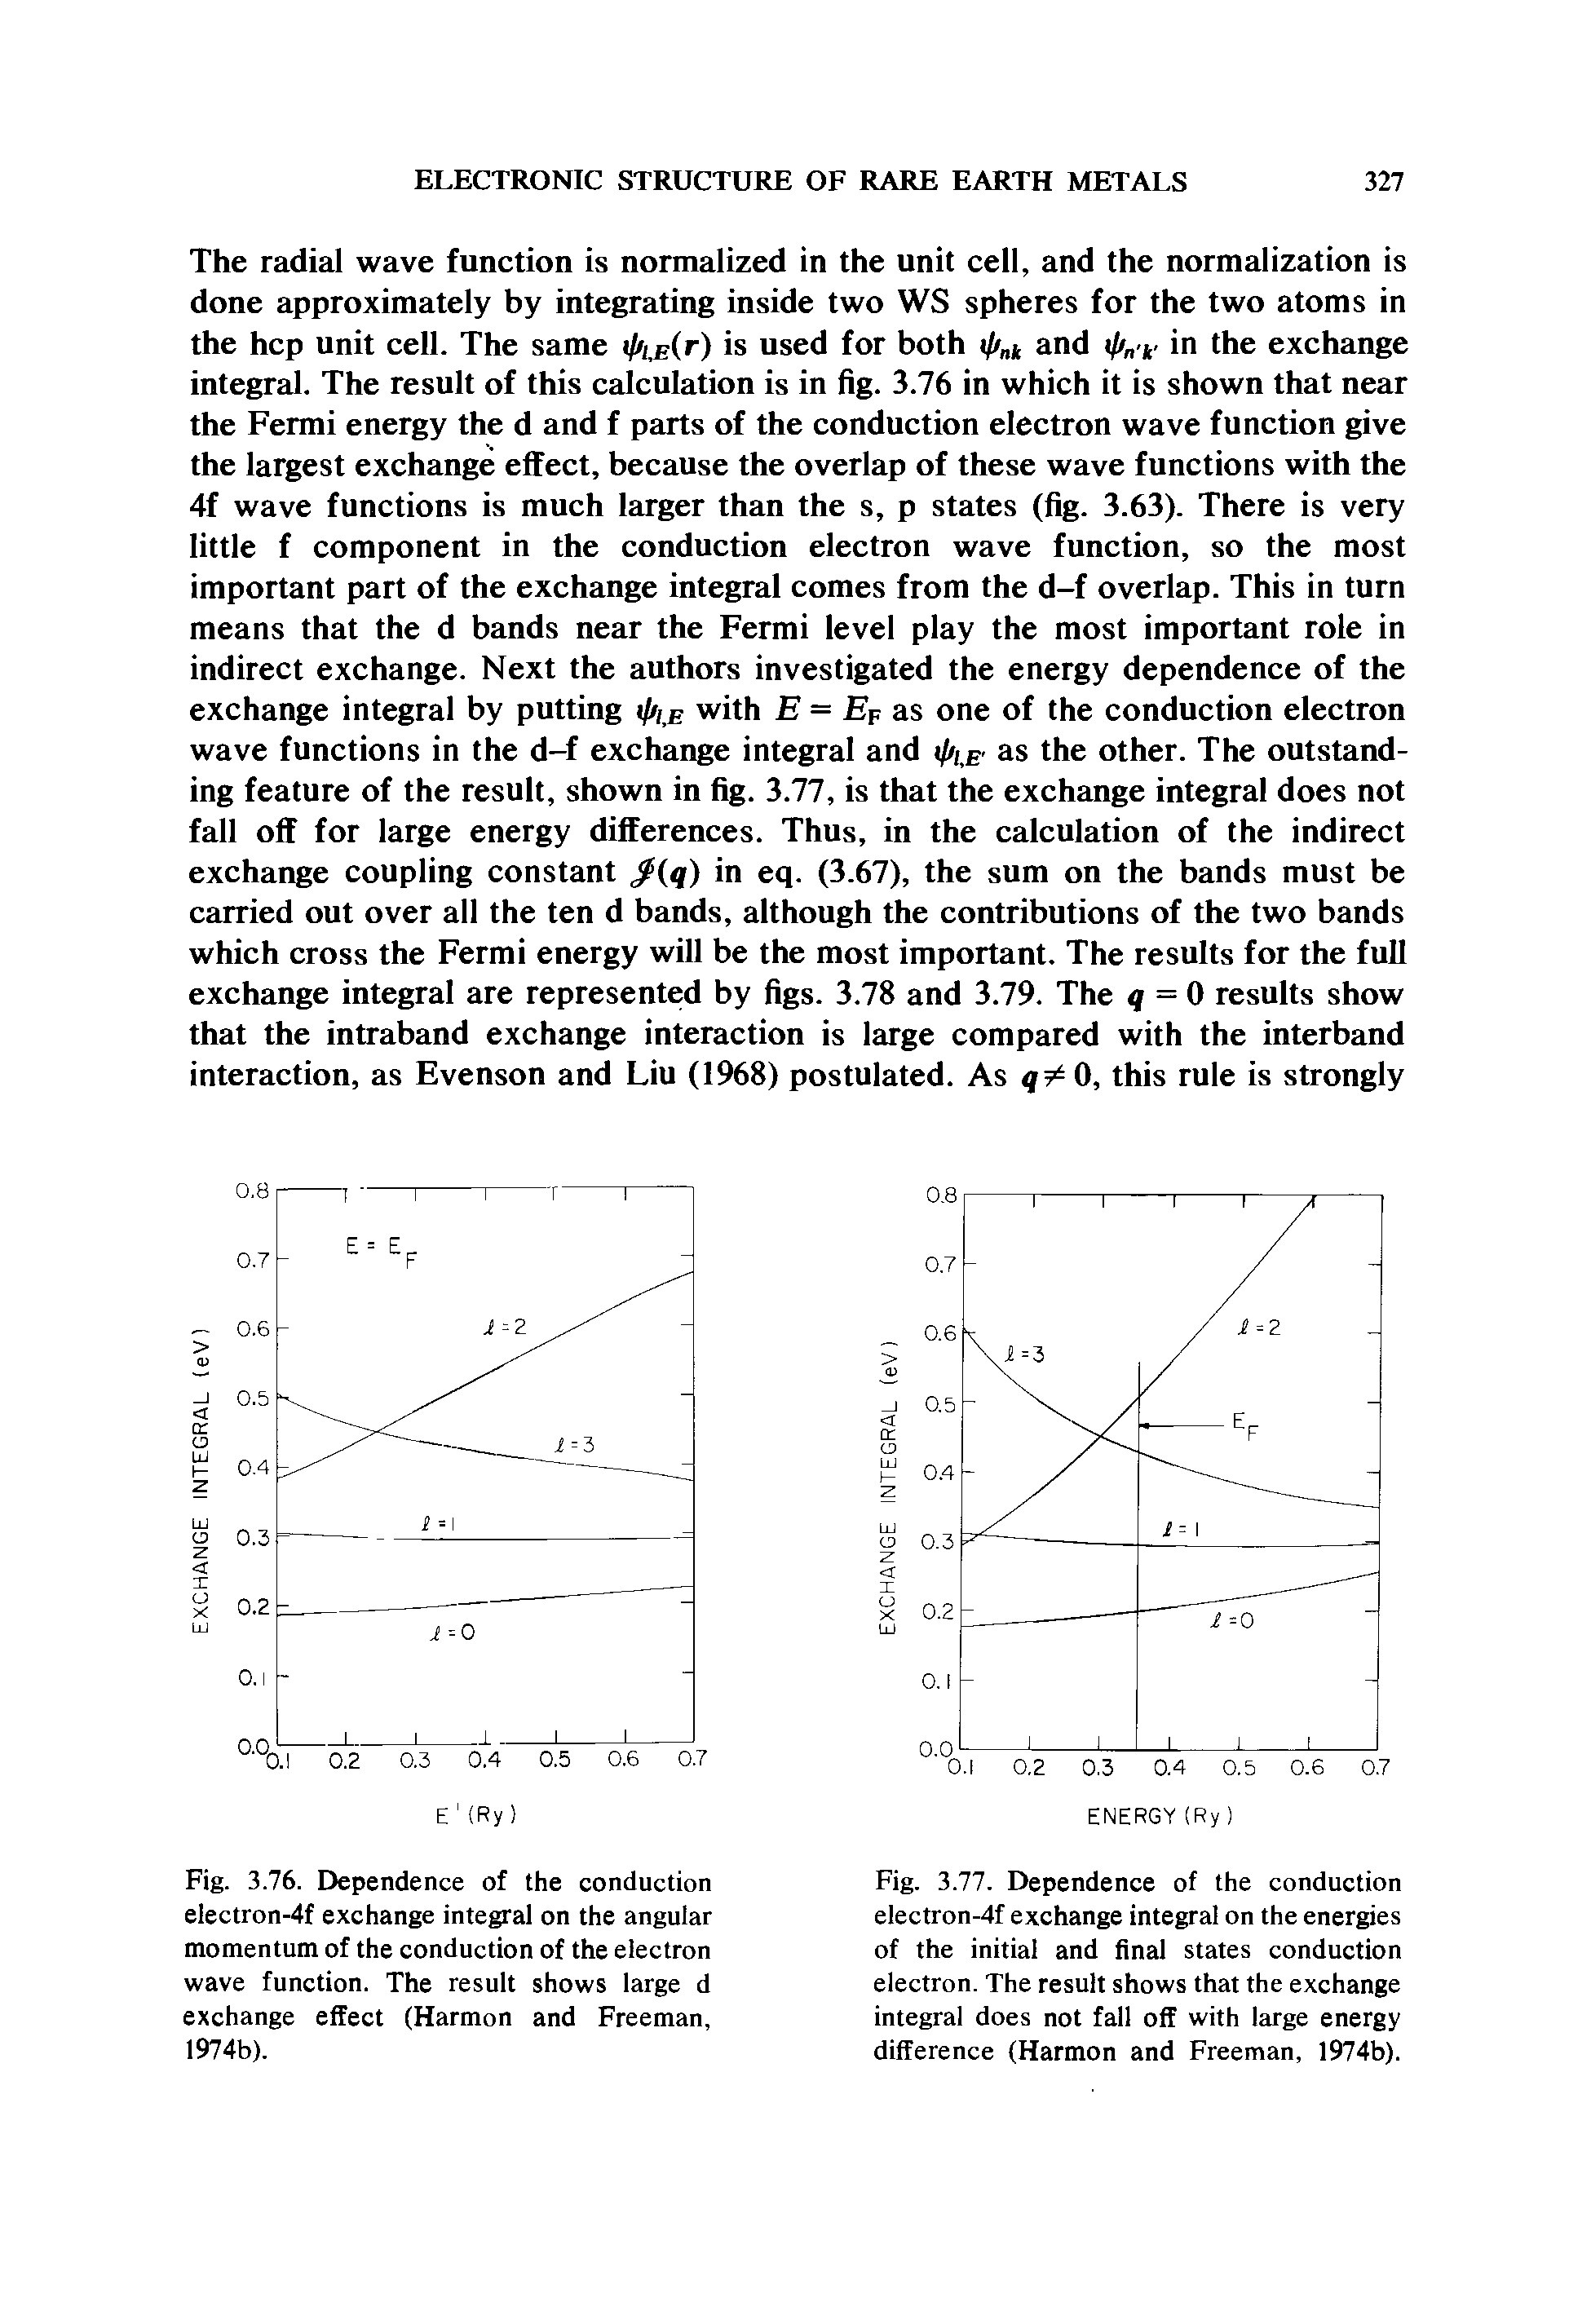 Fig. 3.76. Dependence of the conduction electron-4f exchange integral on the angular momentum of the conduction of the electron wave function. The result shows large d exchange effect (Harmon and Freeman, 1974b).